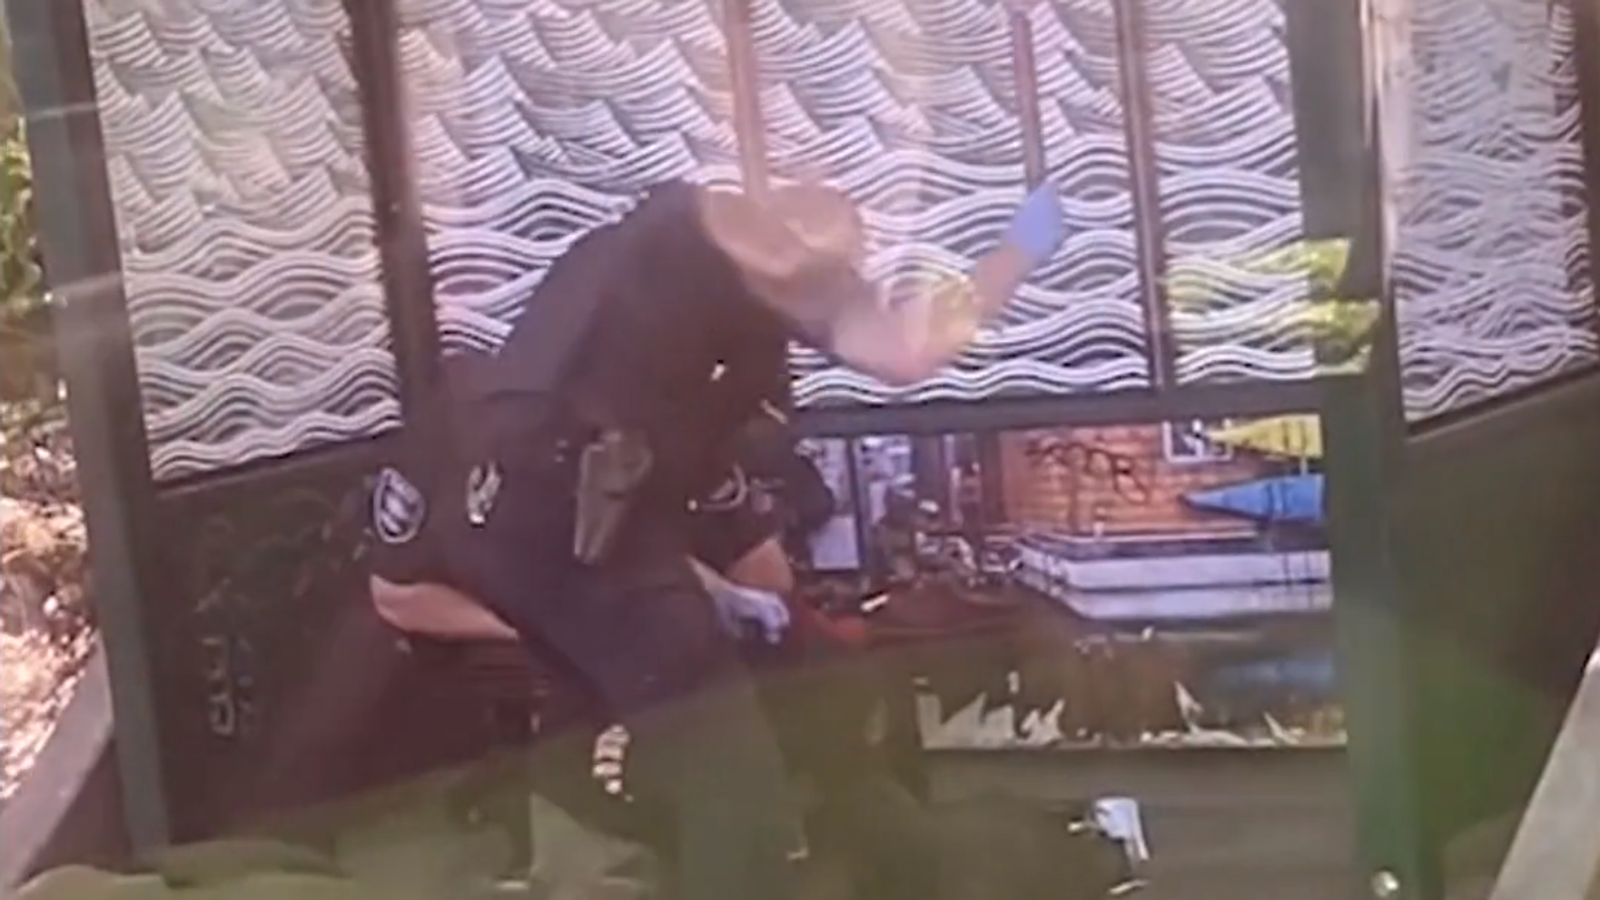 Seattle police officers filmed beating man on ground with batons at a bus stop